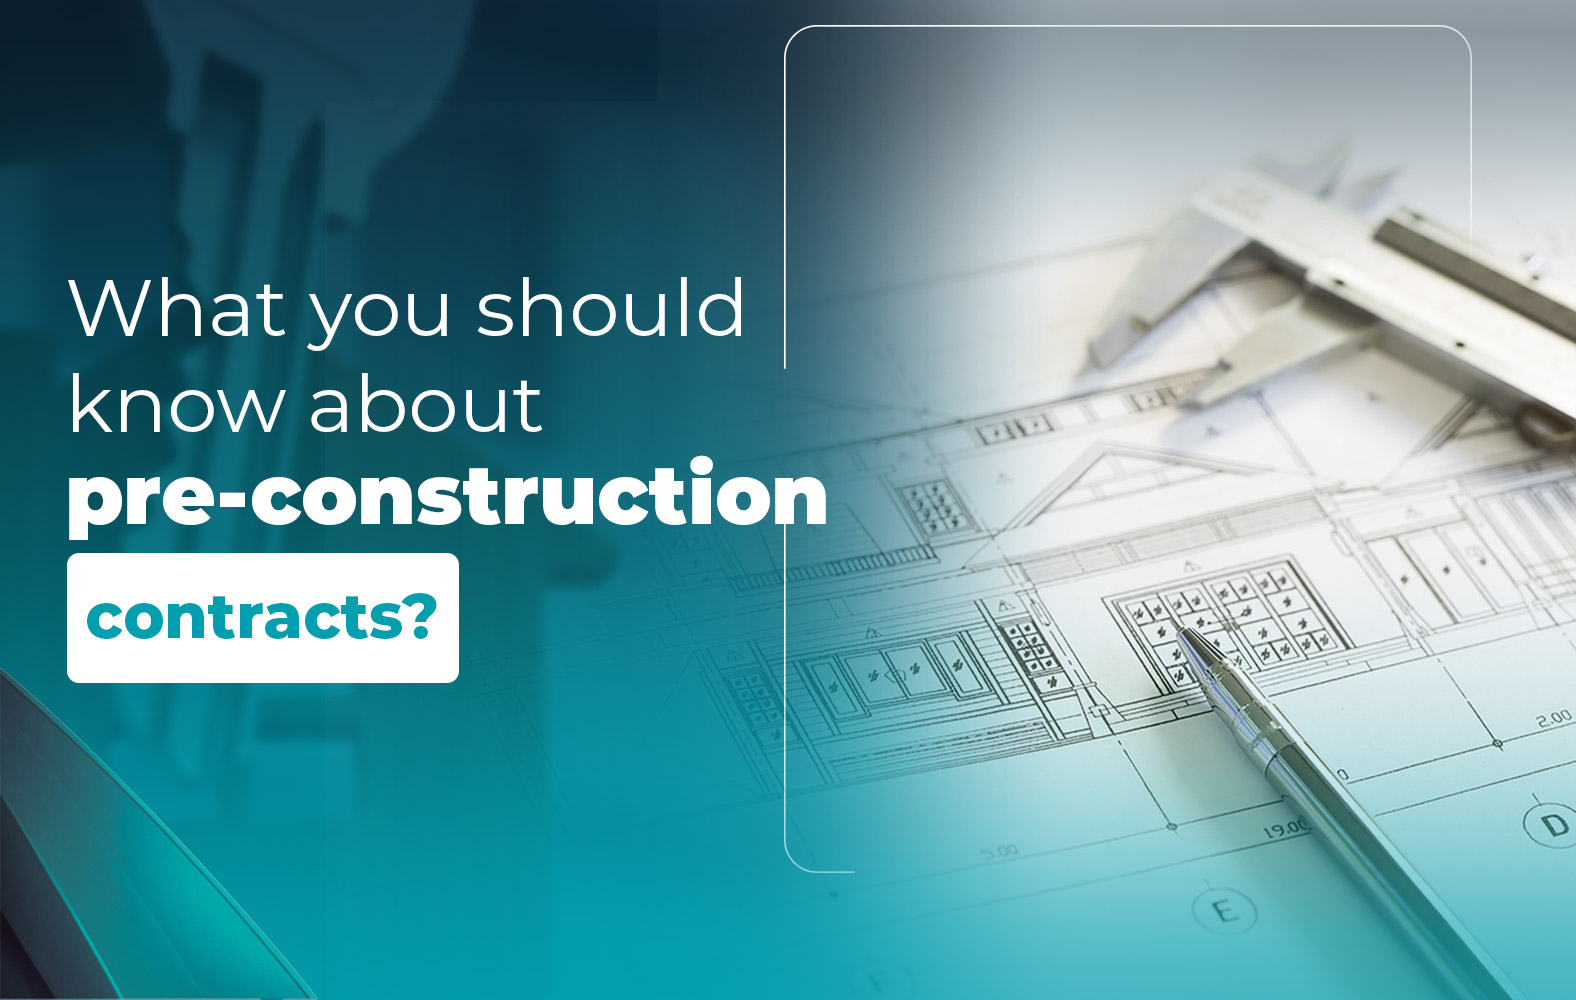 Things you should know about the PRE-CONSTRUCTION contract